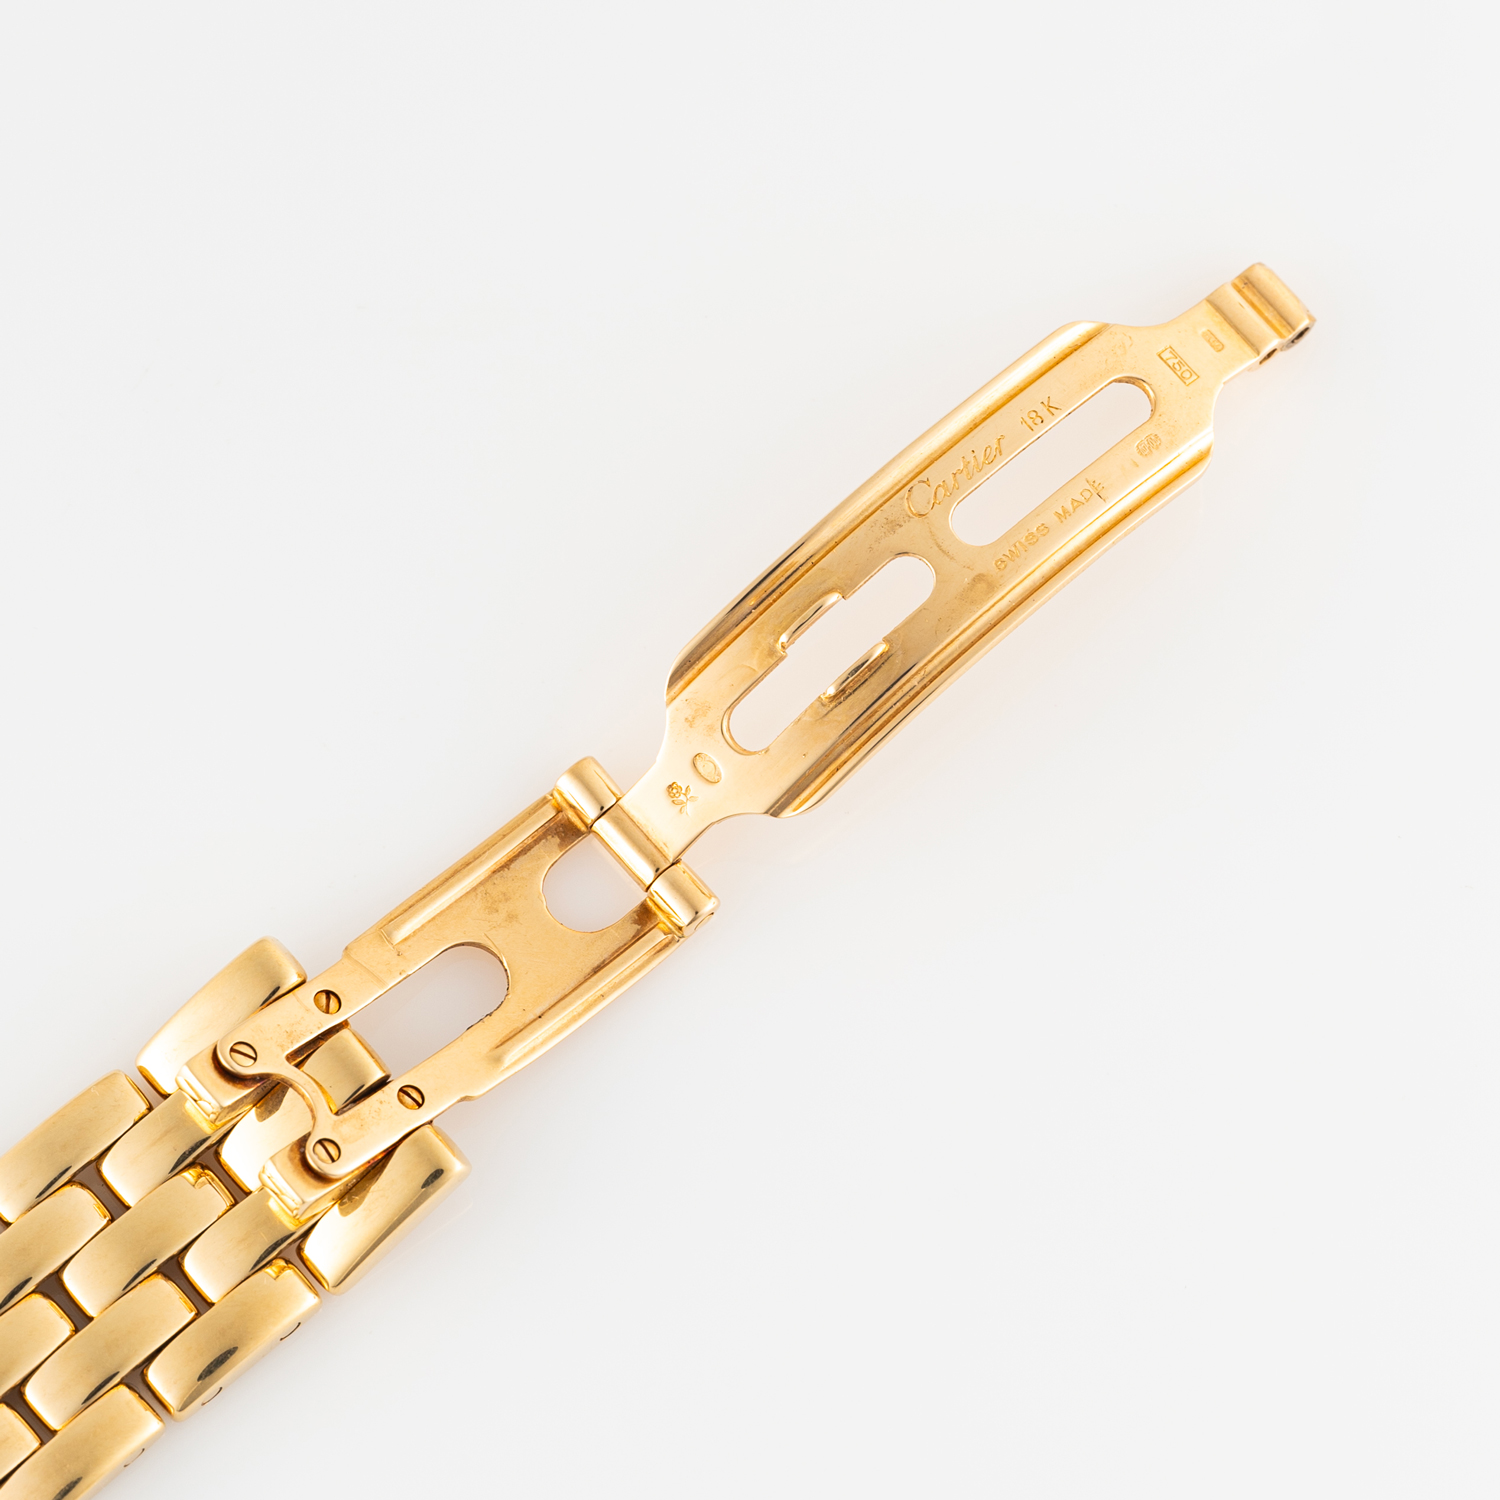 A RARE GENTLEMAN'S SIZE 18K SOLID GOLD & DIAMOND CARTIER PANTHERE BRACELET WATCH CIRCA 1990, REF. - Image 7 of 9